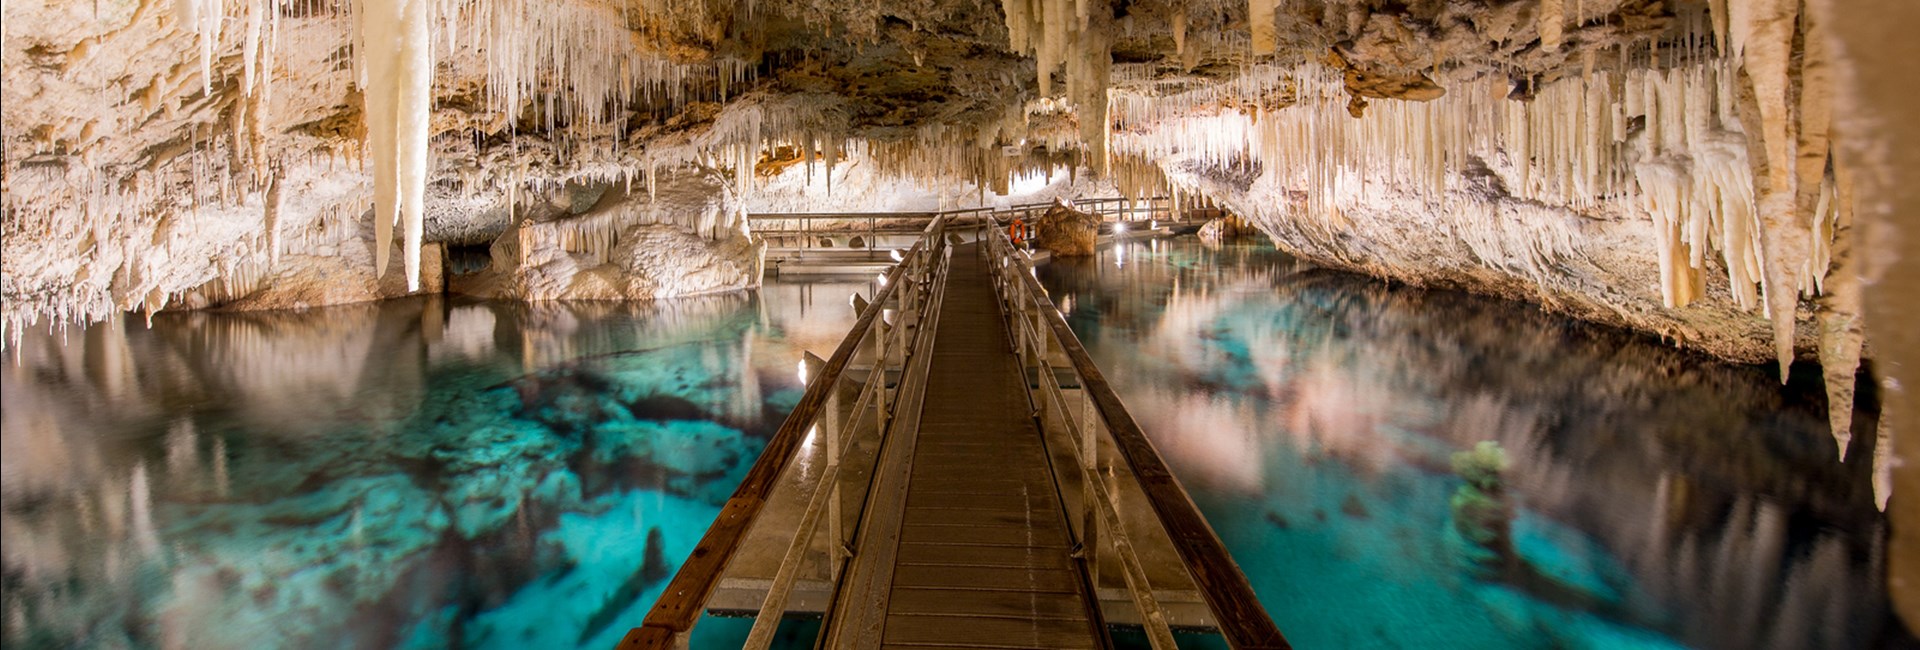 Wooden walkway over a clear pool of blue water in an underground cave